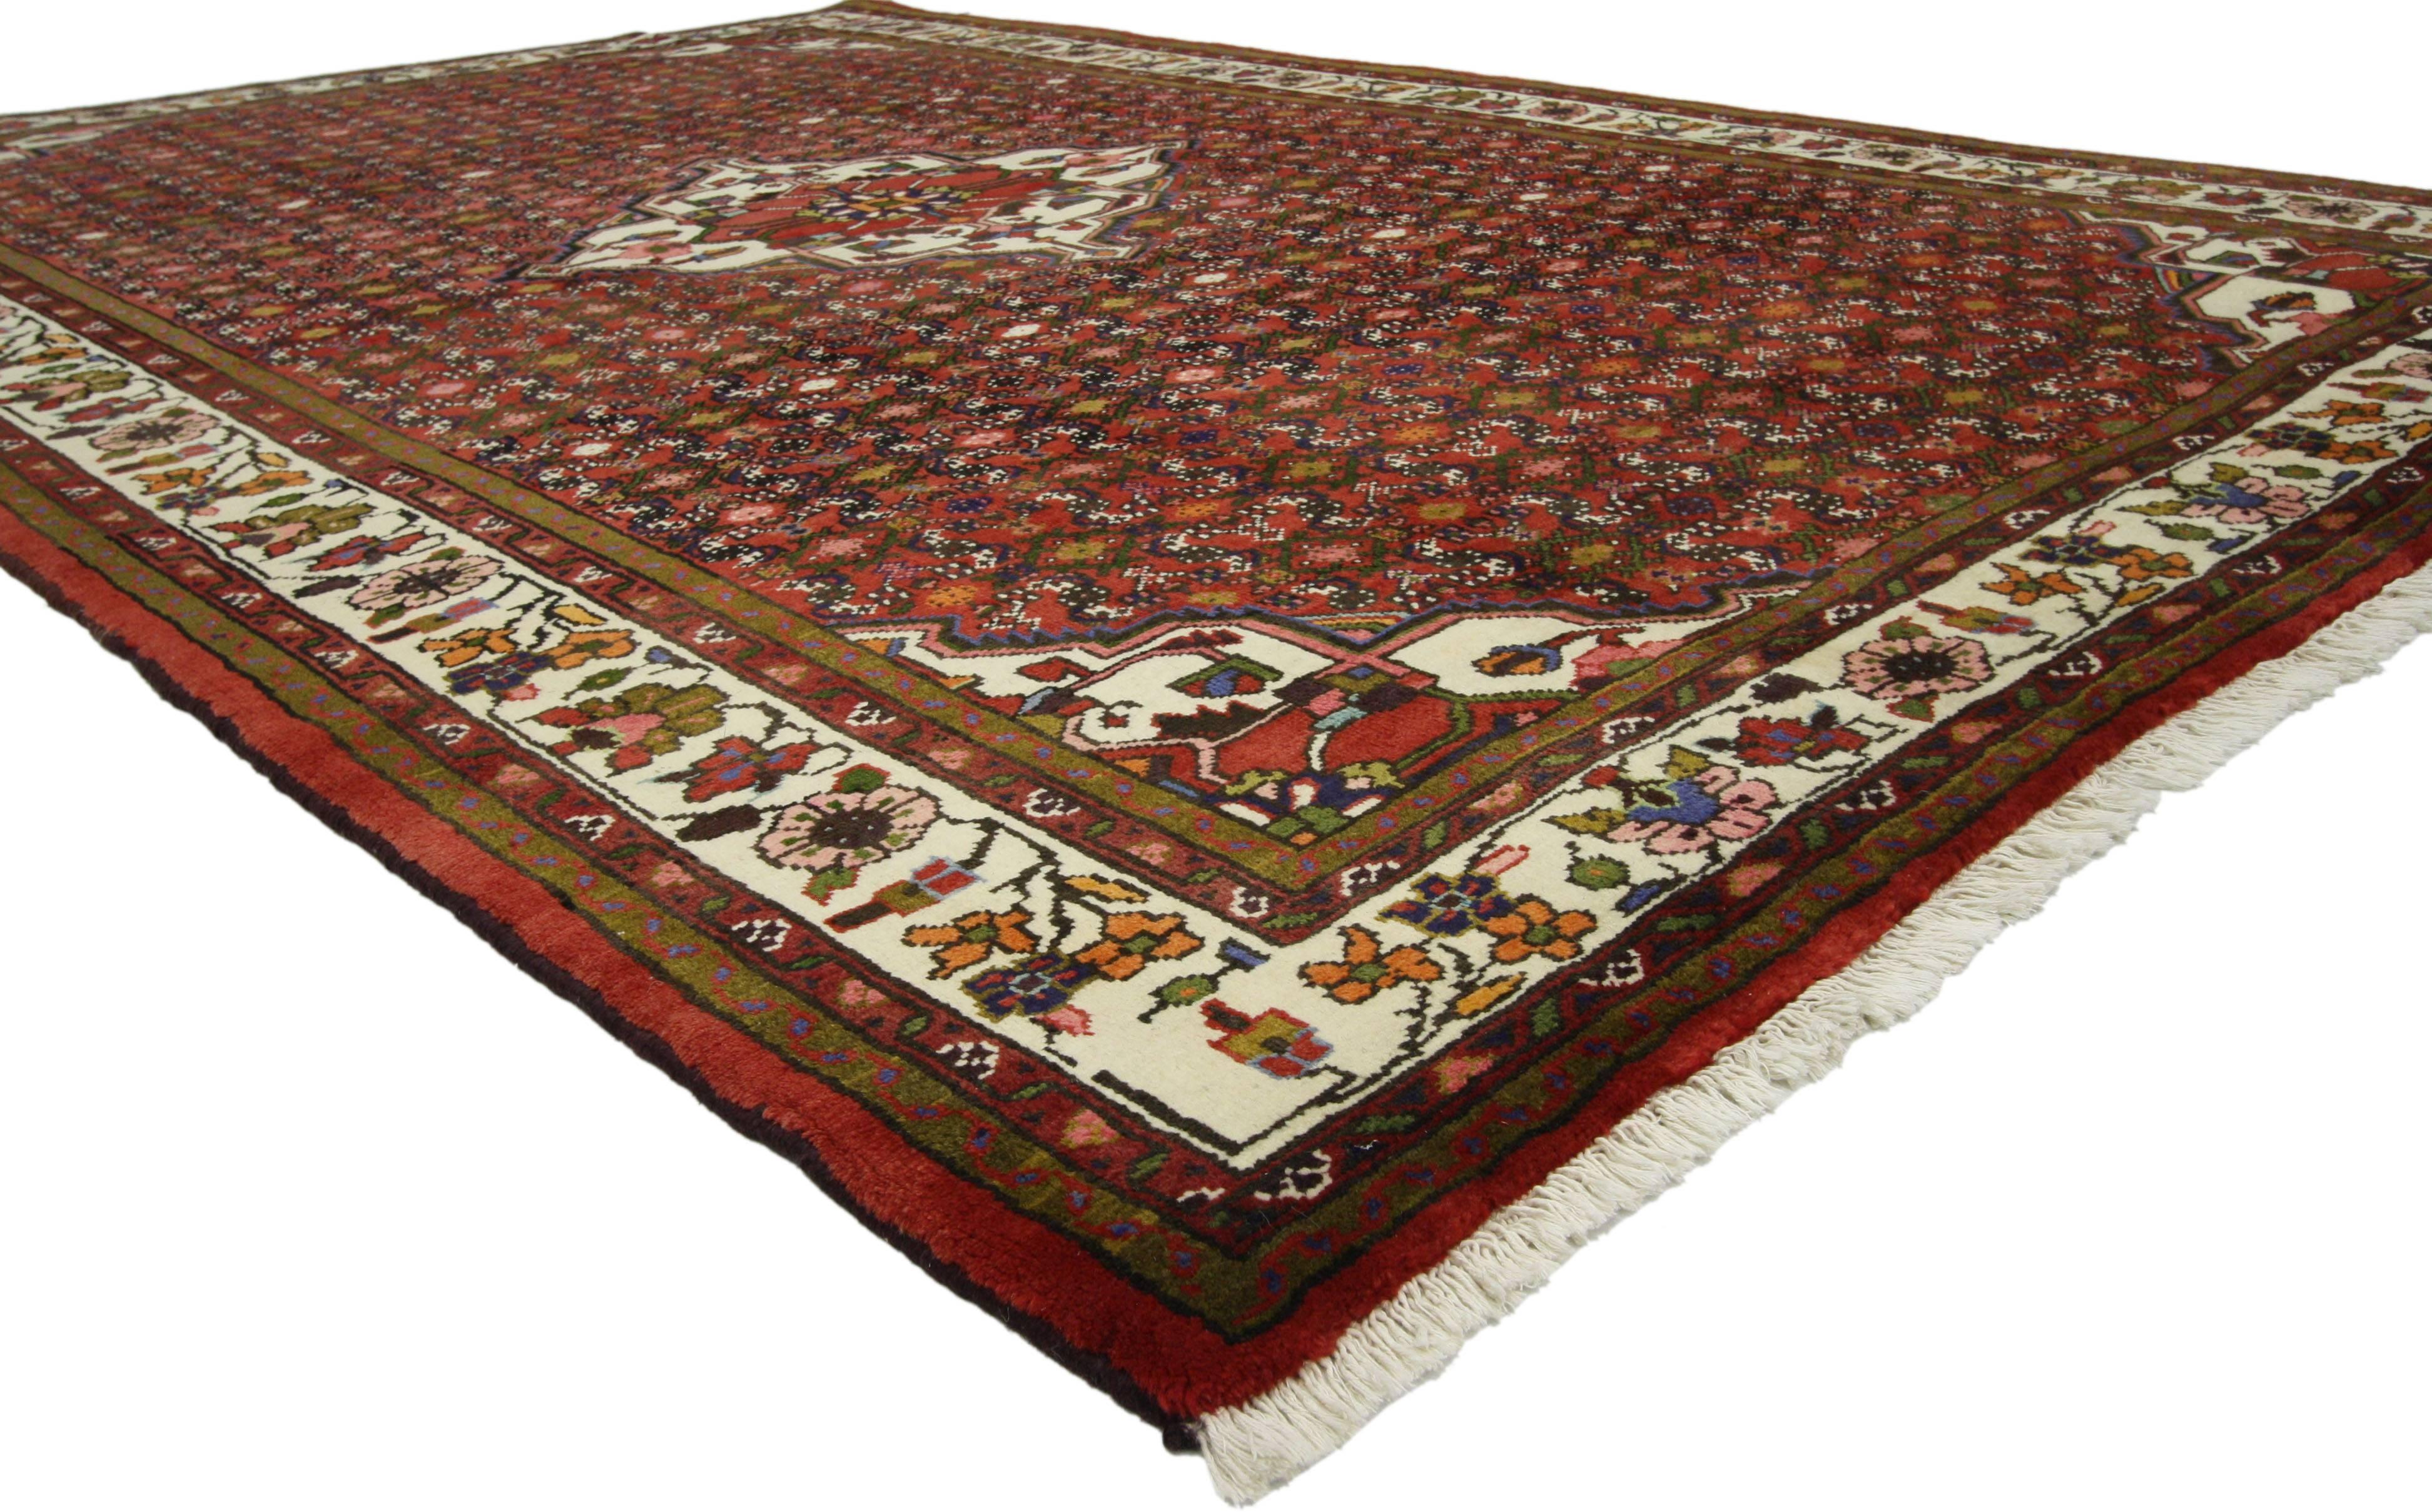 76028 Vintage Persian Hosseinabad rug with Tudor Manor House style. This hand knotted wool vintage Persian Hosseinabad rug features a cusped diamond center medallion surrounded by the all-over Classic Herati design. The all-over Herati pattern is